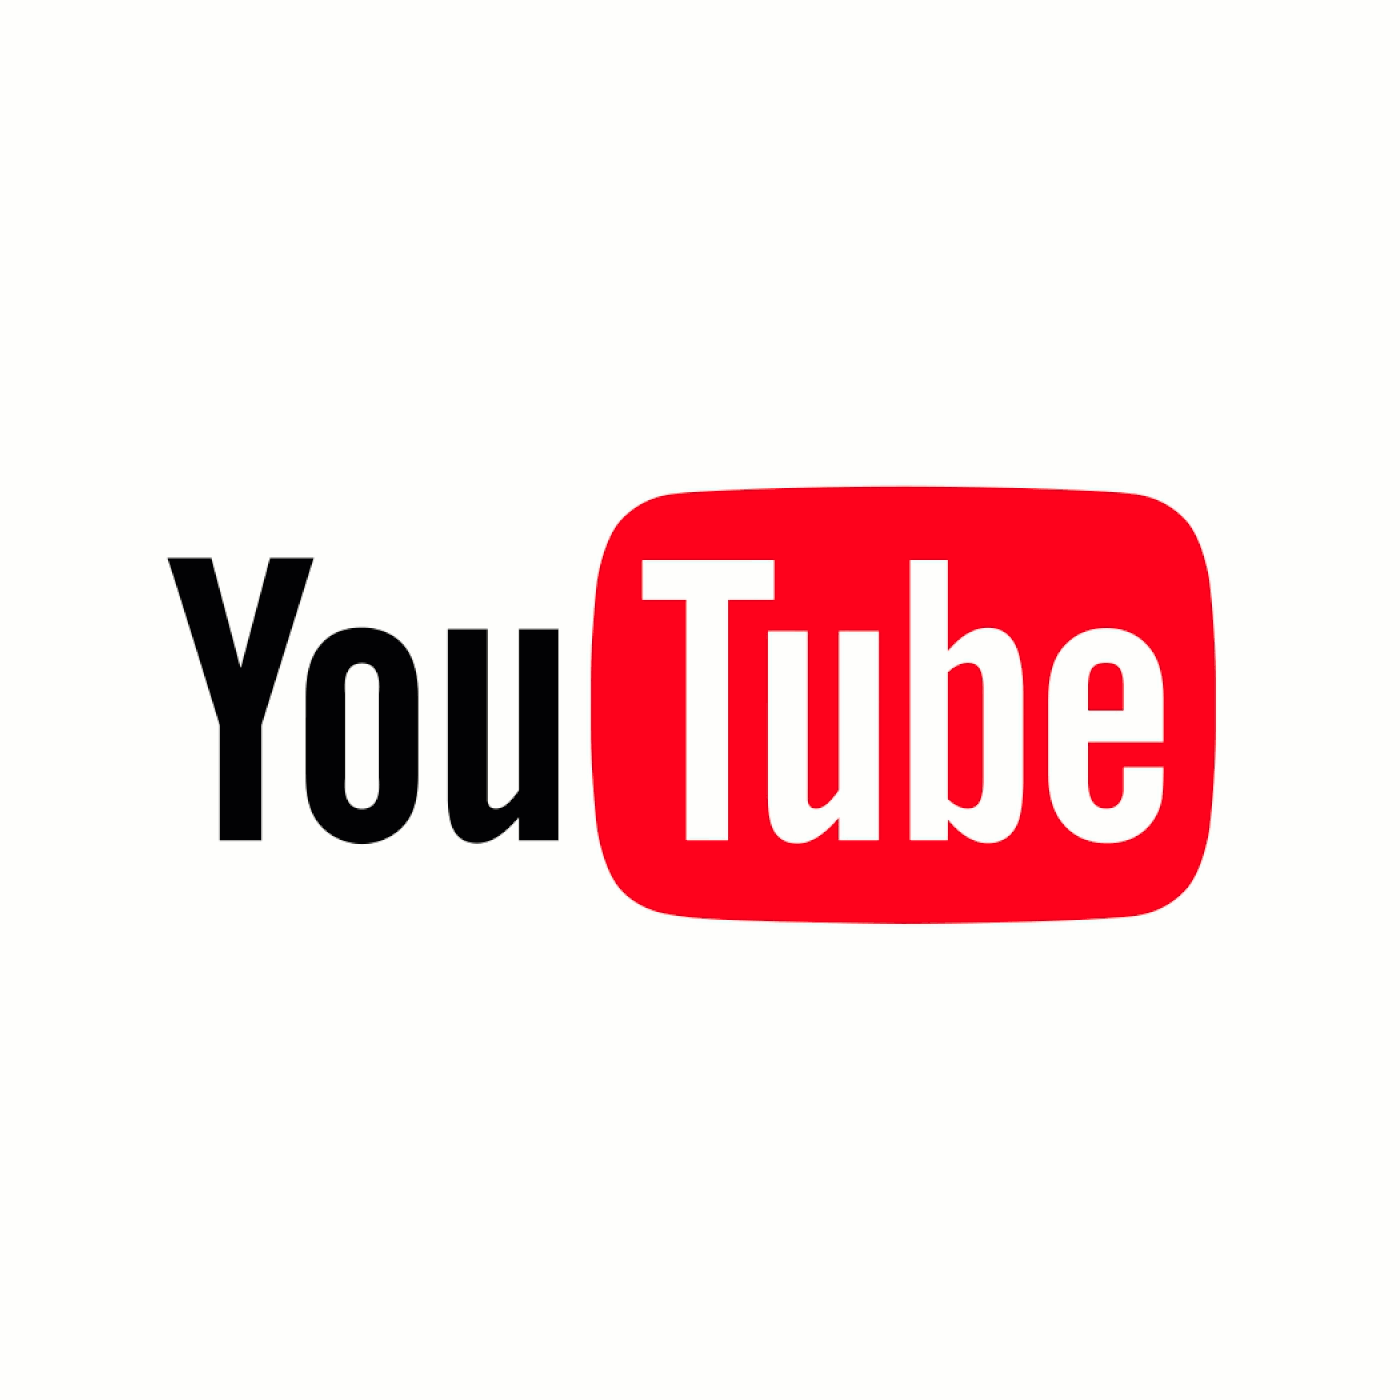 YouTube Old Logo - YouTube has a new look and, for the first time, a new logo - The Verge